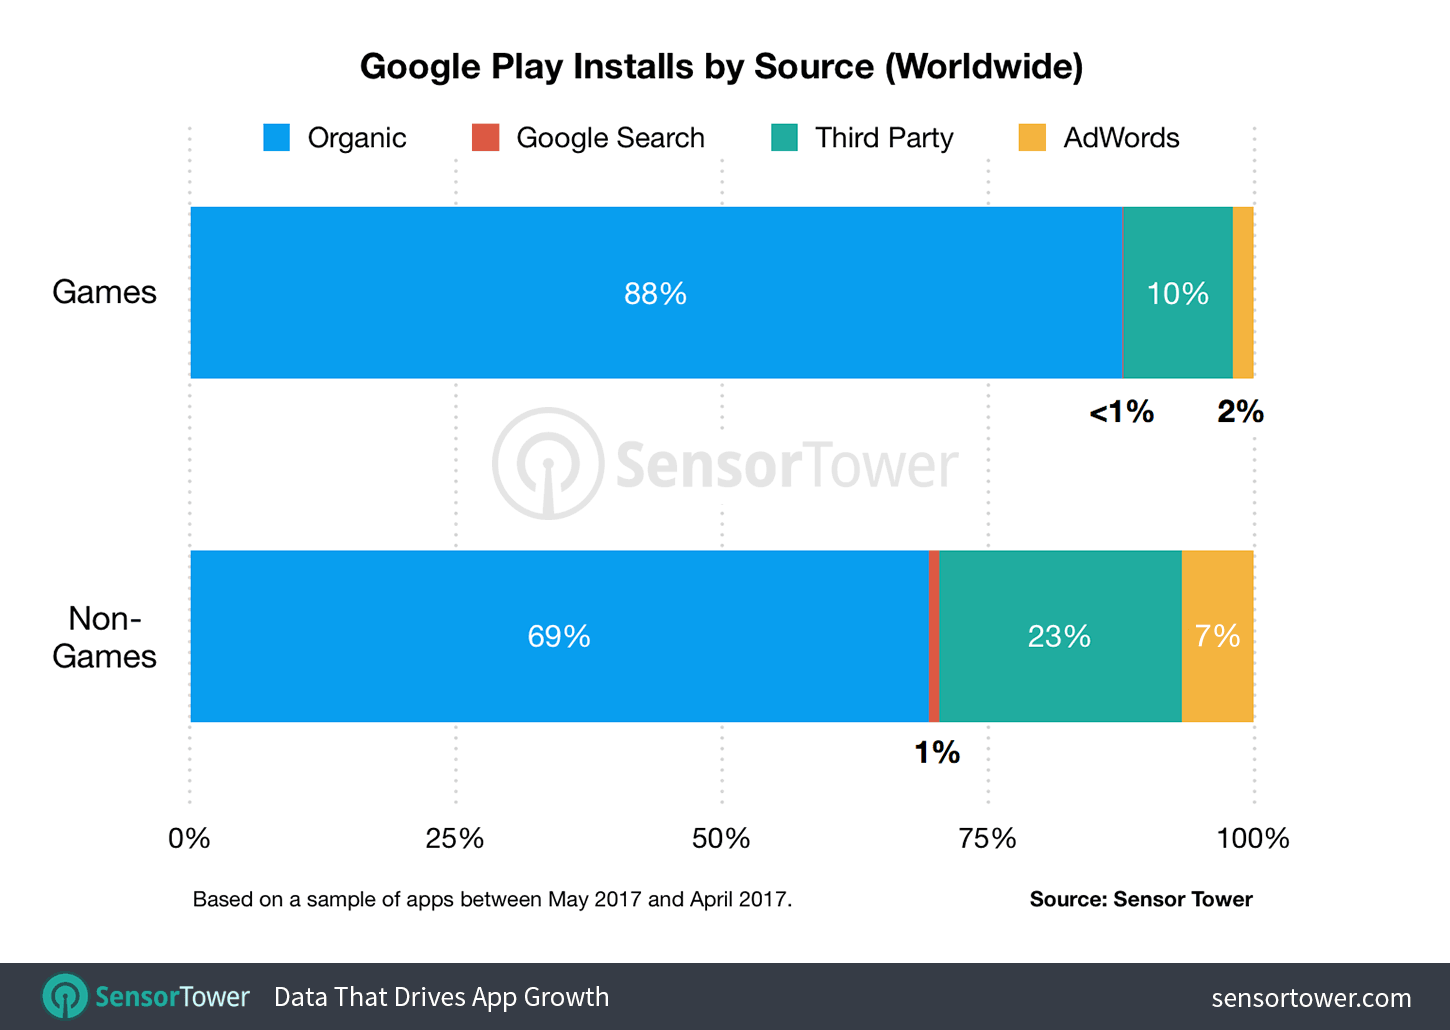 Google Play Game and Non-Game Downloads by Source